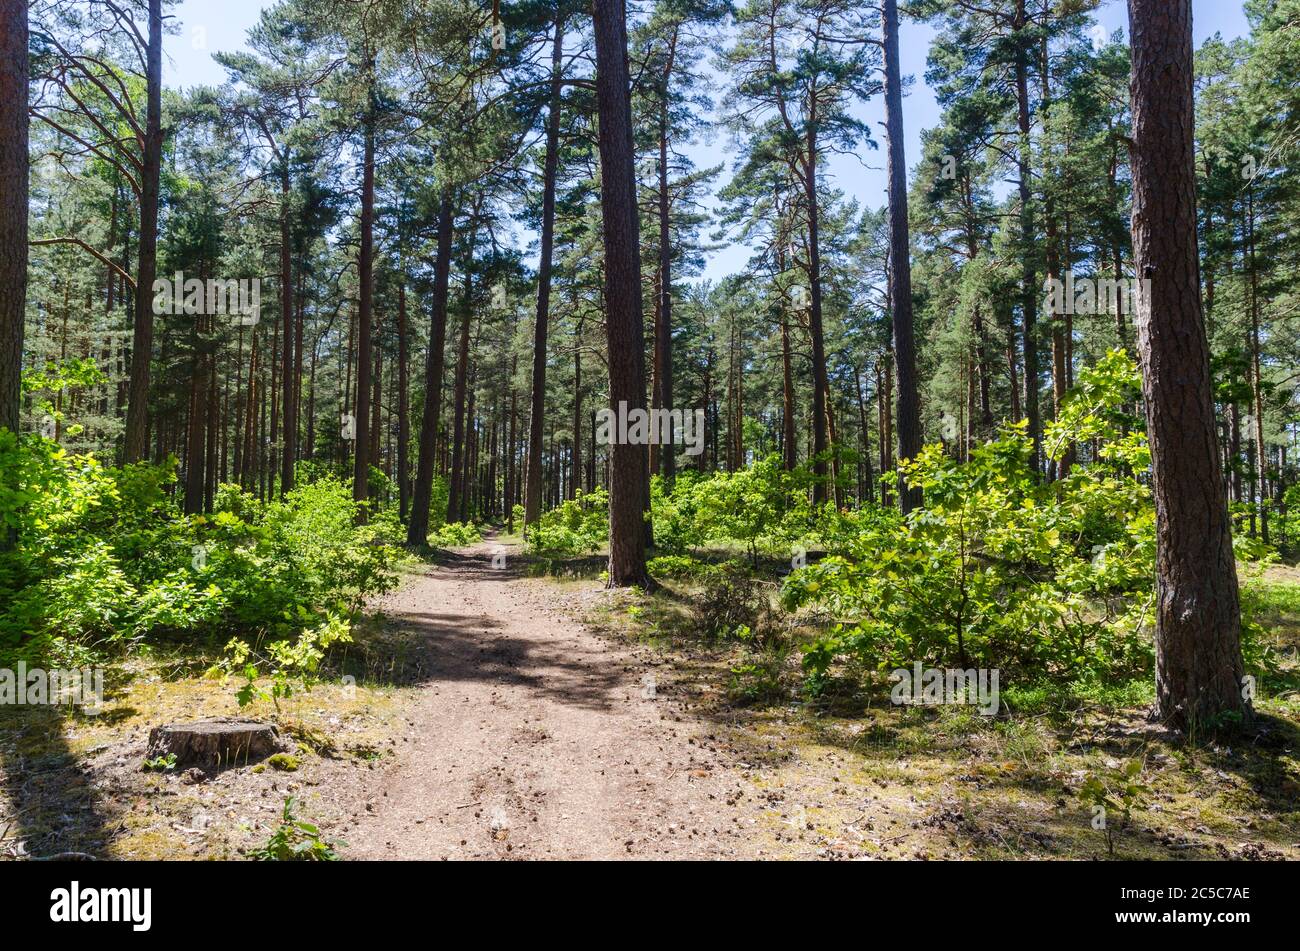 Sunlit footpath in a pine tree forest with lush greenery on the ground Stock Photo